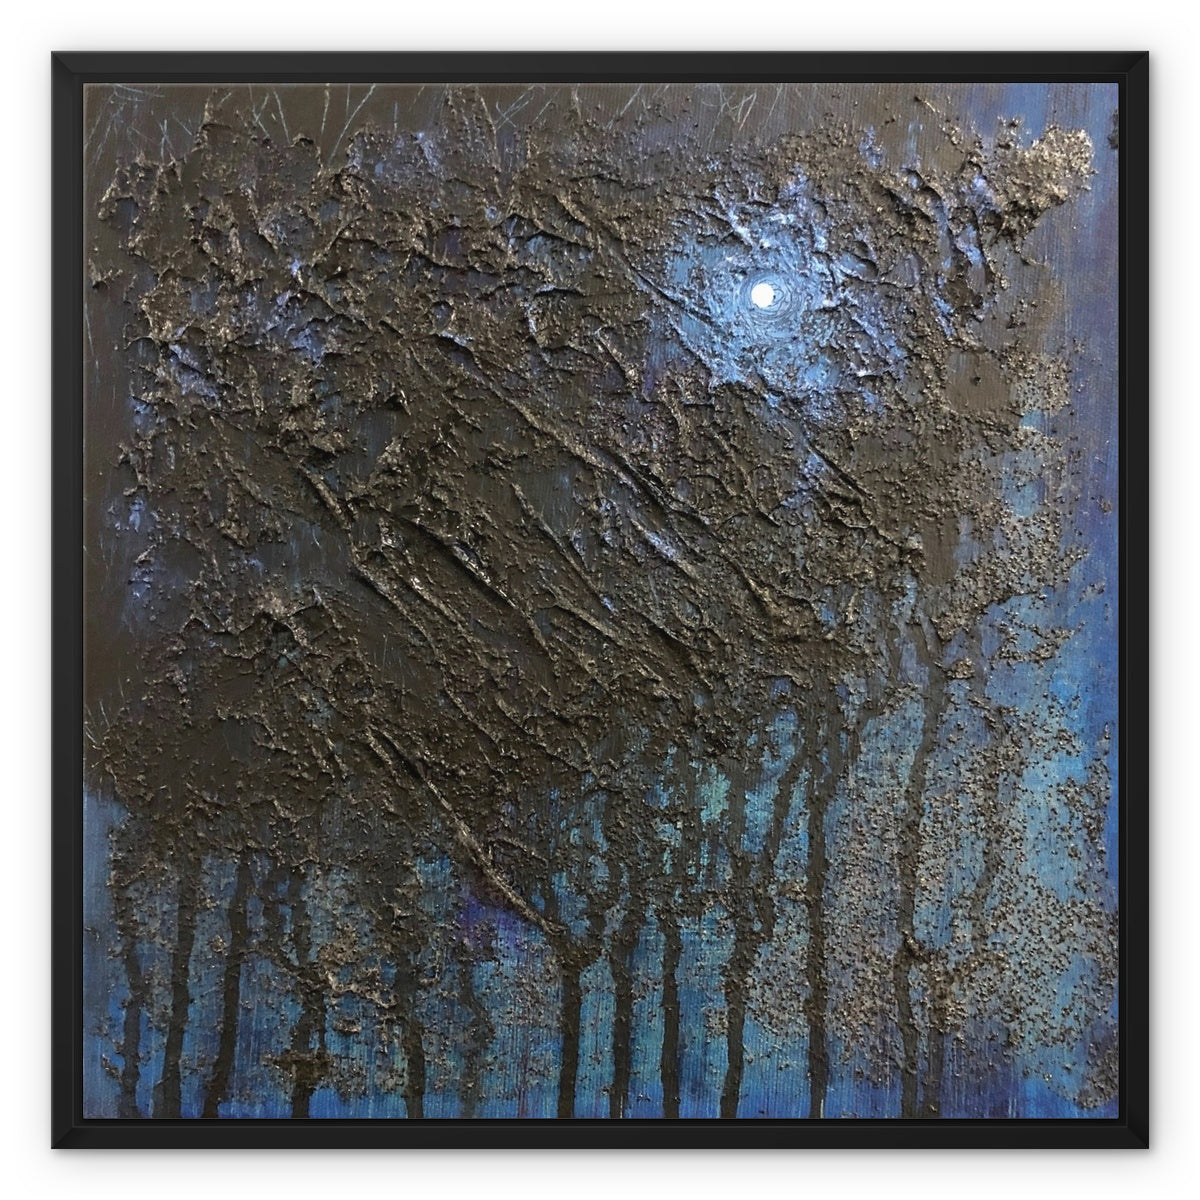 The Blue Moon Wood Abstract Painting | Framed Canvas From Scotland-Floating Framed Canvas Prints-Abstract & Impressionistic Art Gallery-24"x24"-Black Frame-Paintings, Prints, Homeware, Art Gifts From Scotland By Scottish Artist Kevin Hunter